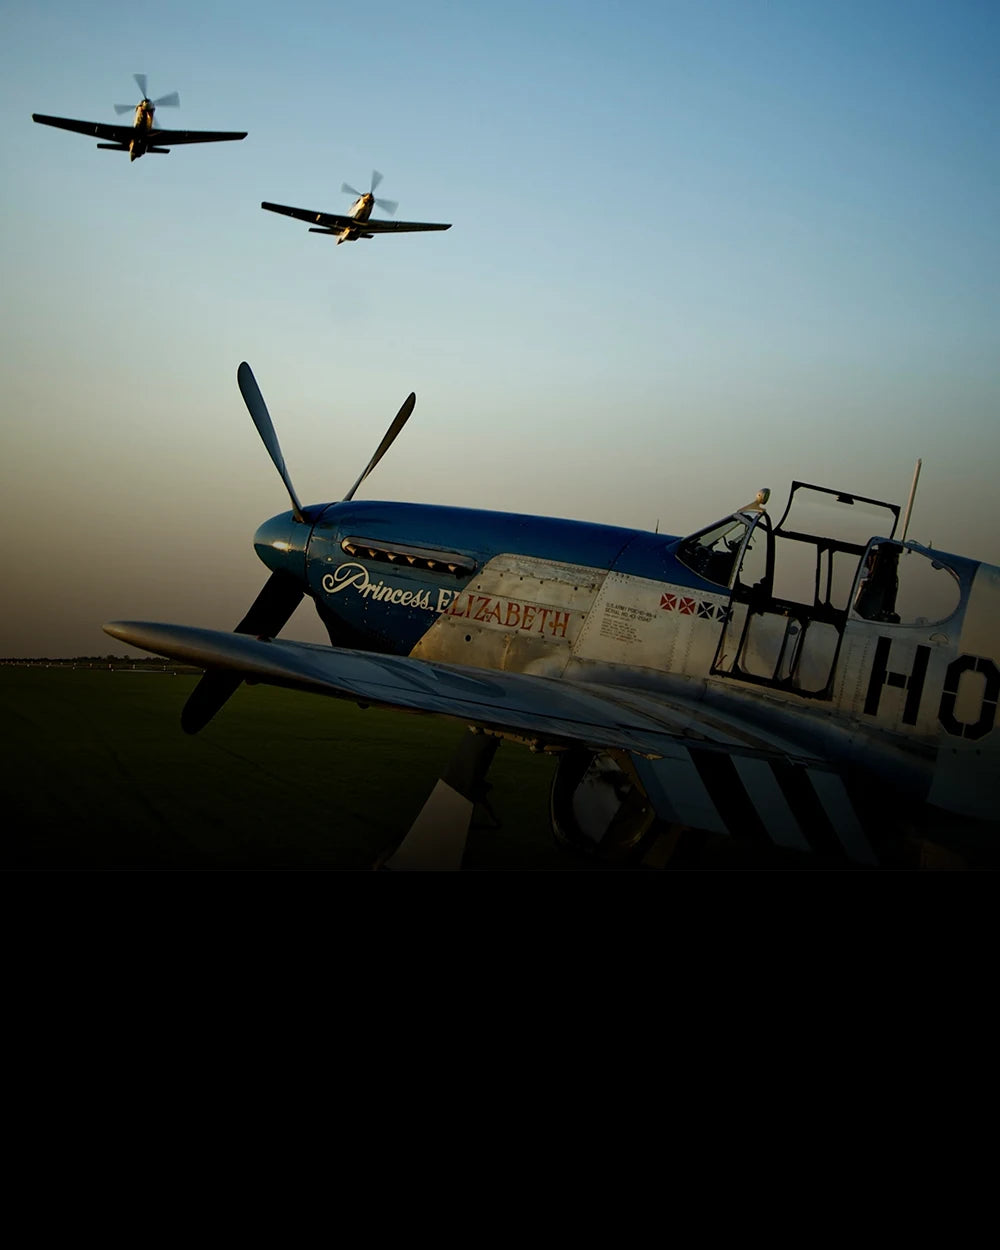 The Bremont Horsemen took off over a decade ago as the world’s only P-51 Mustang formation aerobatic team.